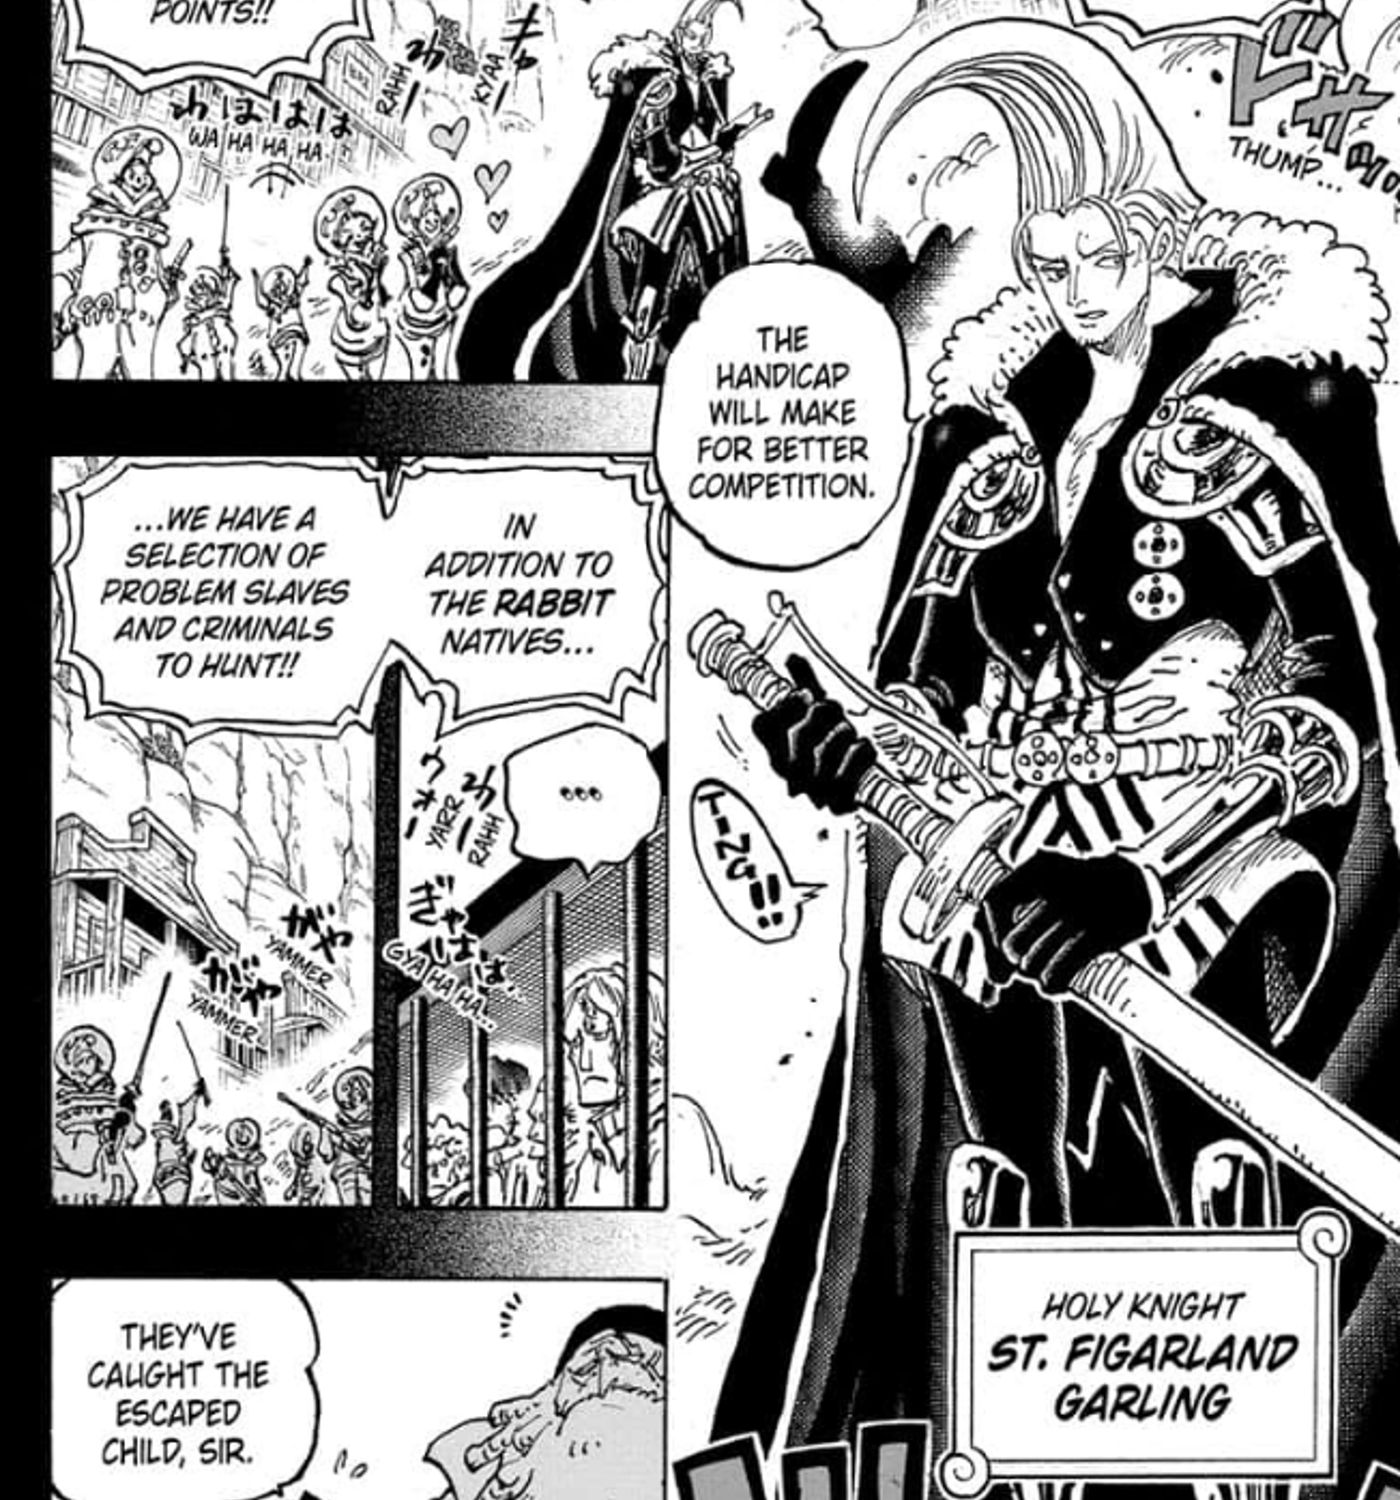 One Piece chapter 1095's God Valley flashback will be the greatest